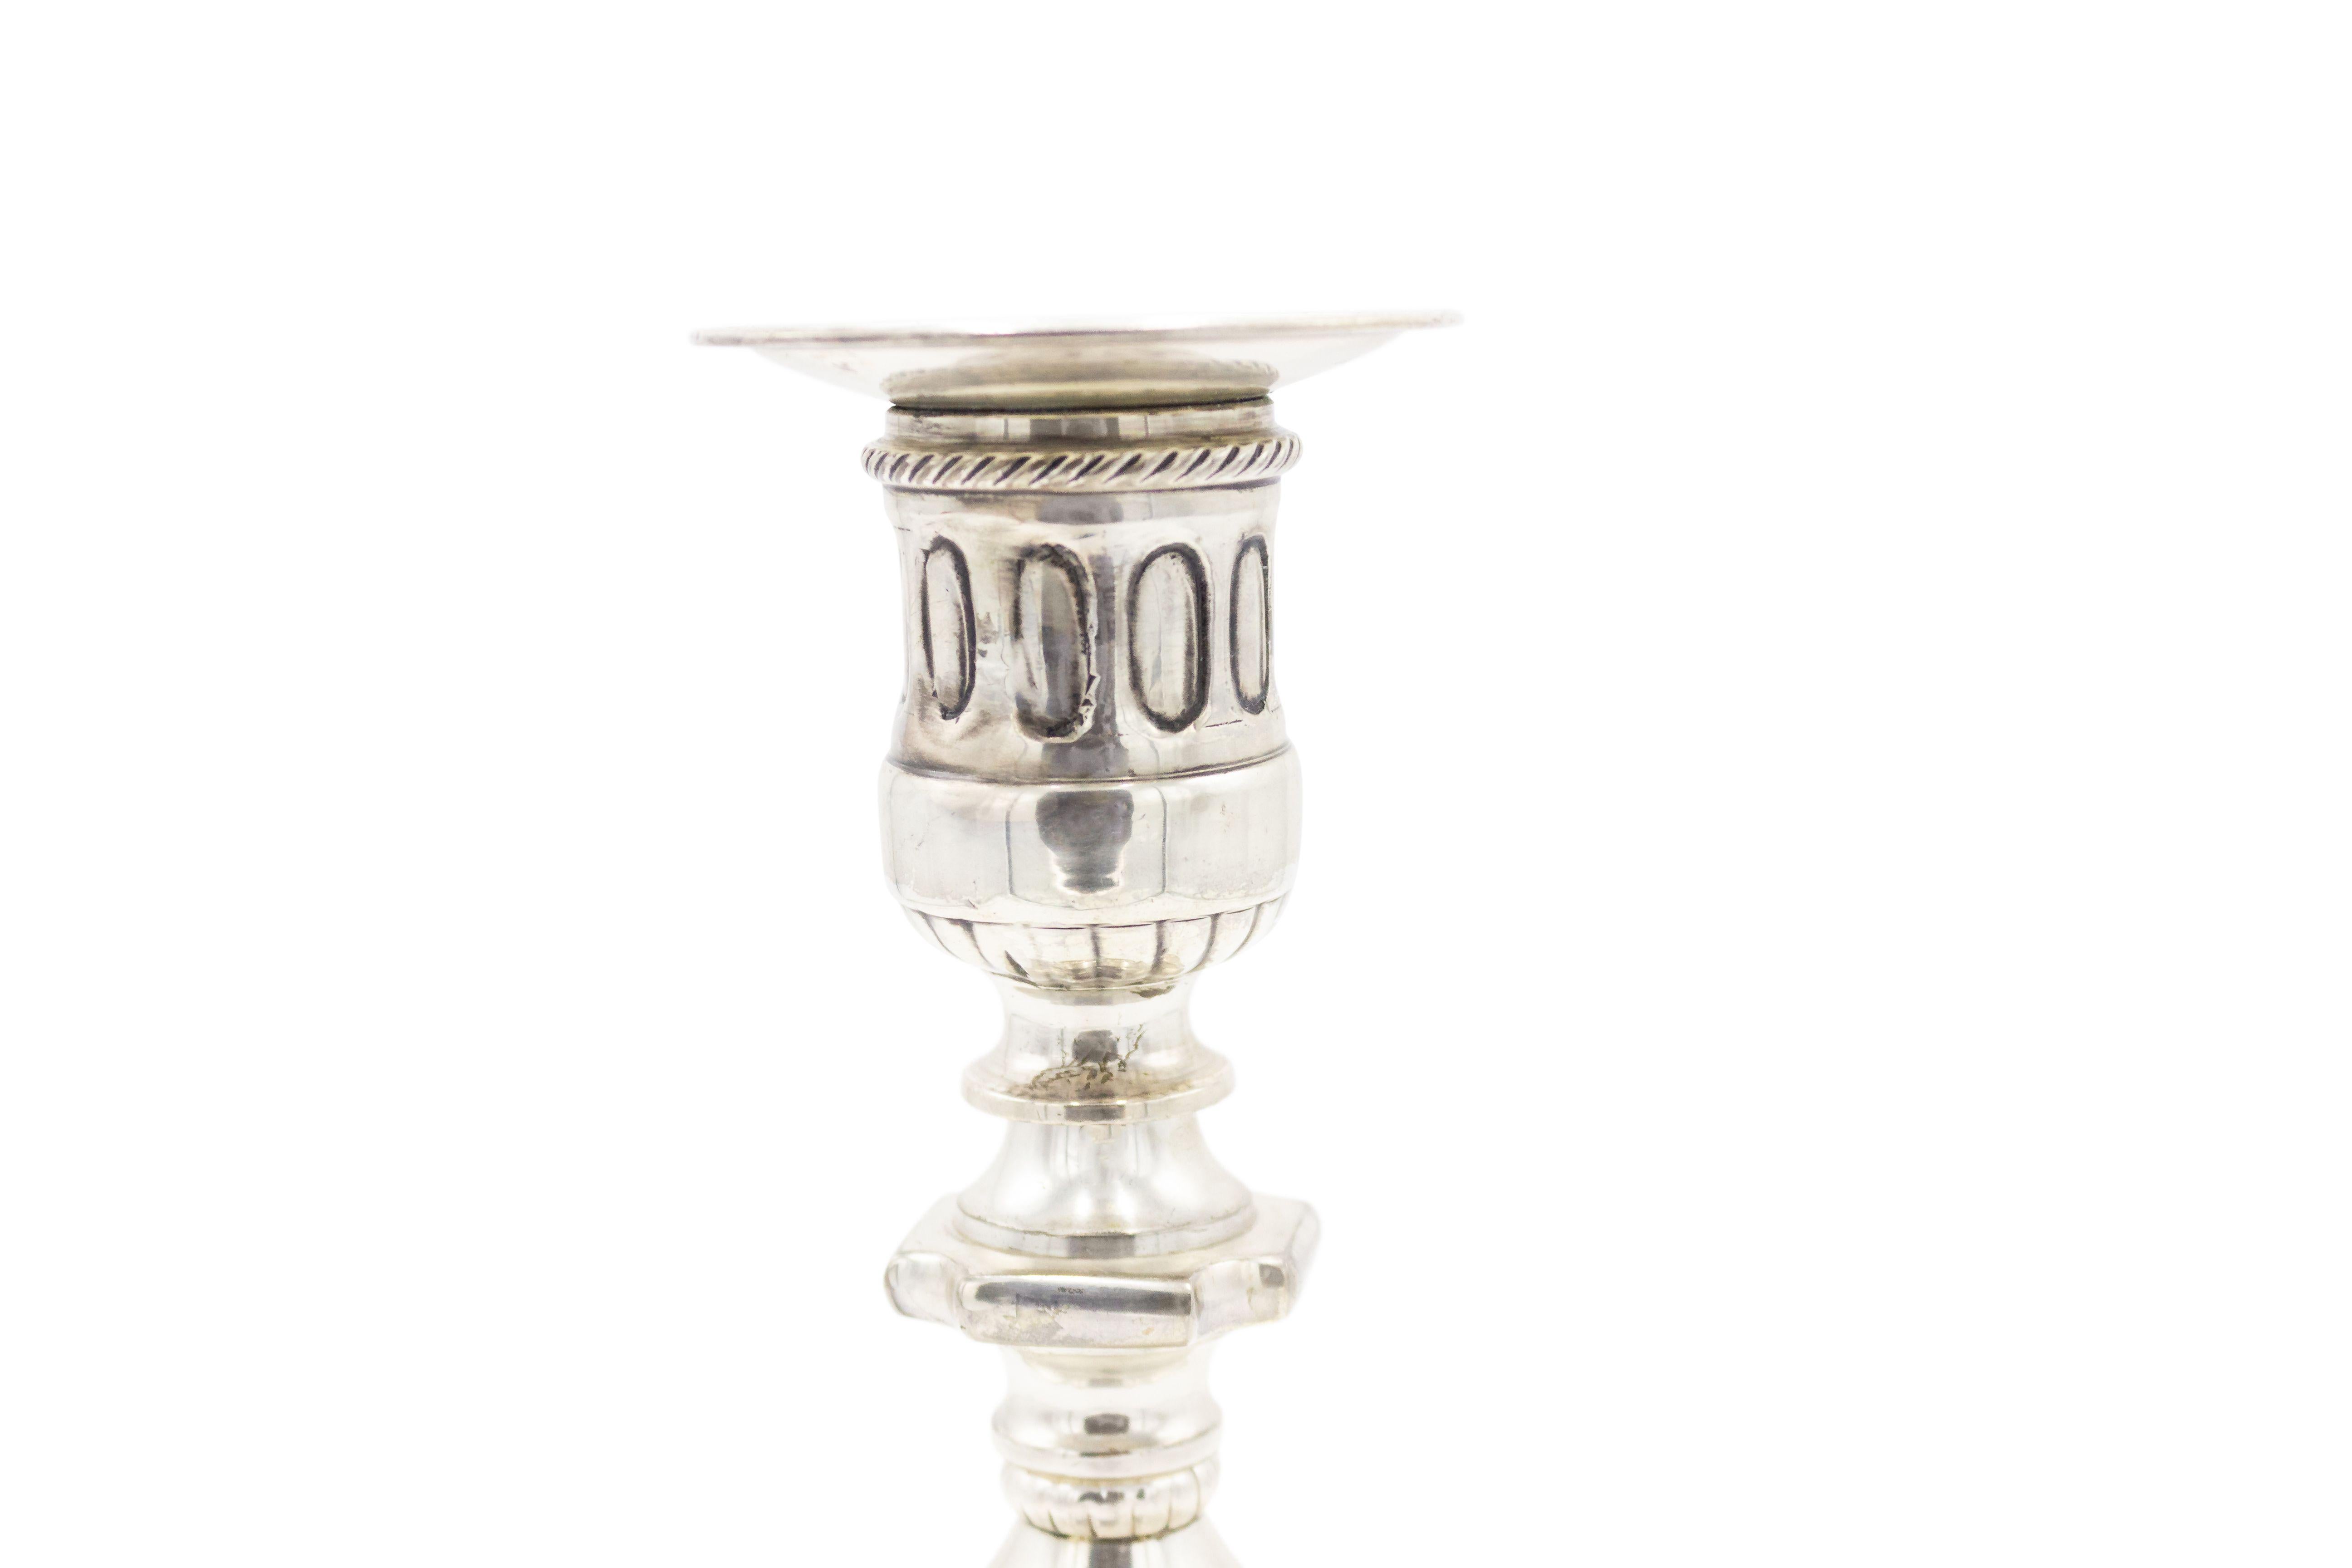 Pair of English Georgian-style (19/20th Cent) silver-plate candlesticks with a festoon design and round base.